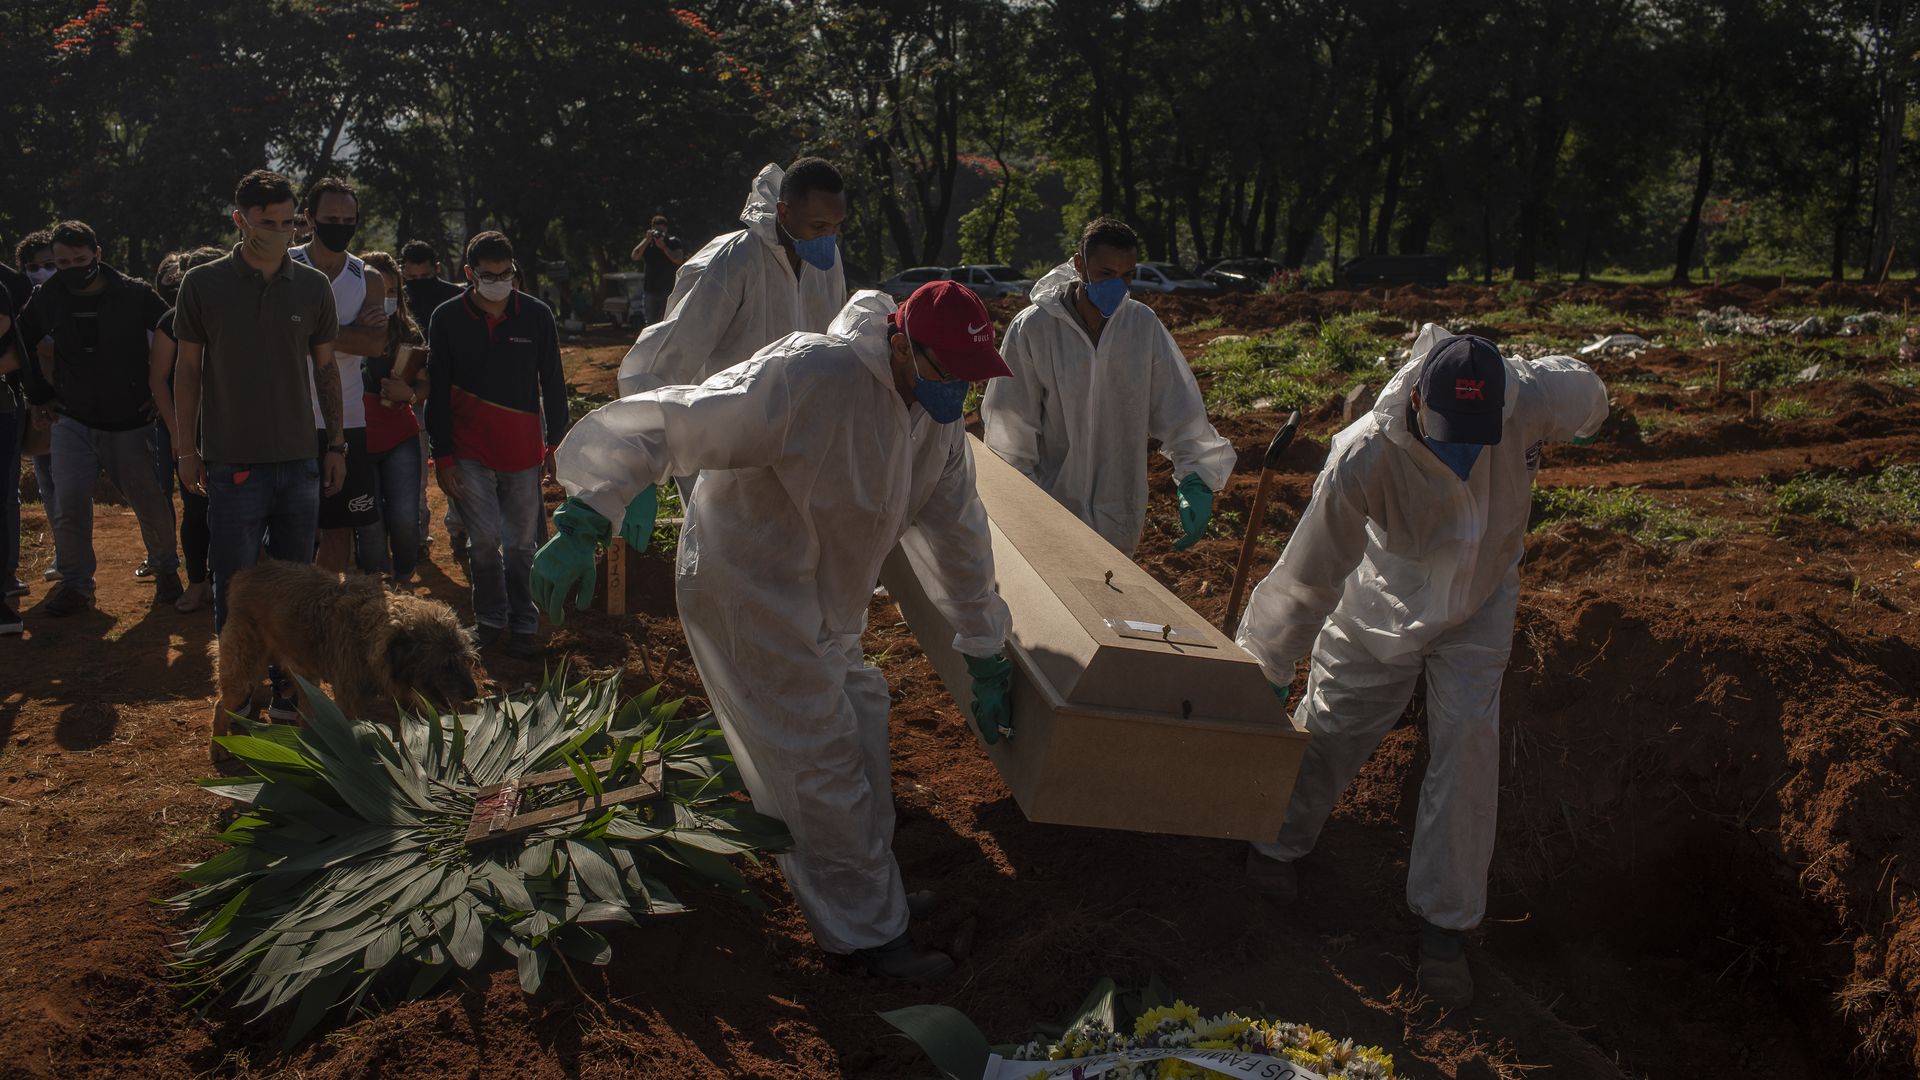 Mourners watch as workers wearing protective equipment bury the casket of a Covid-19 victim at the Vila Formosa cemetery in Sao Paulo, Brazil.